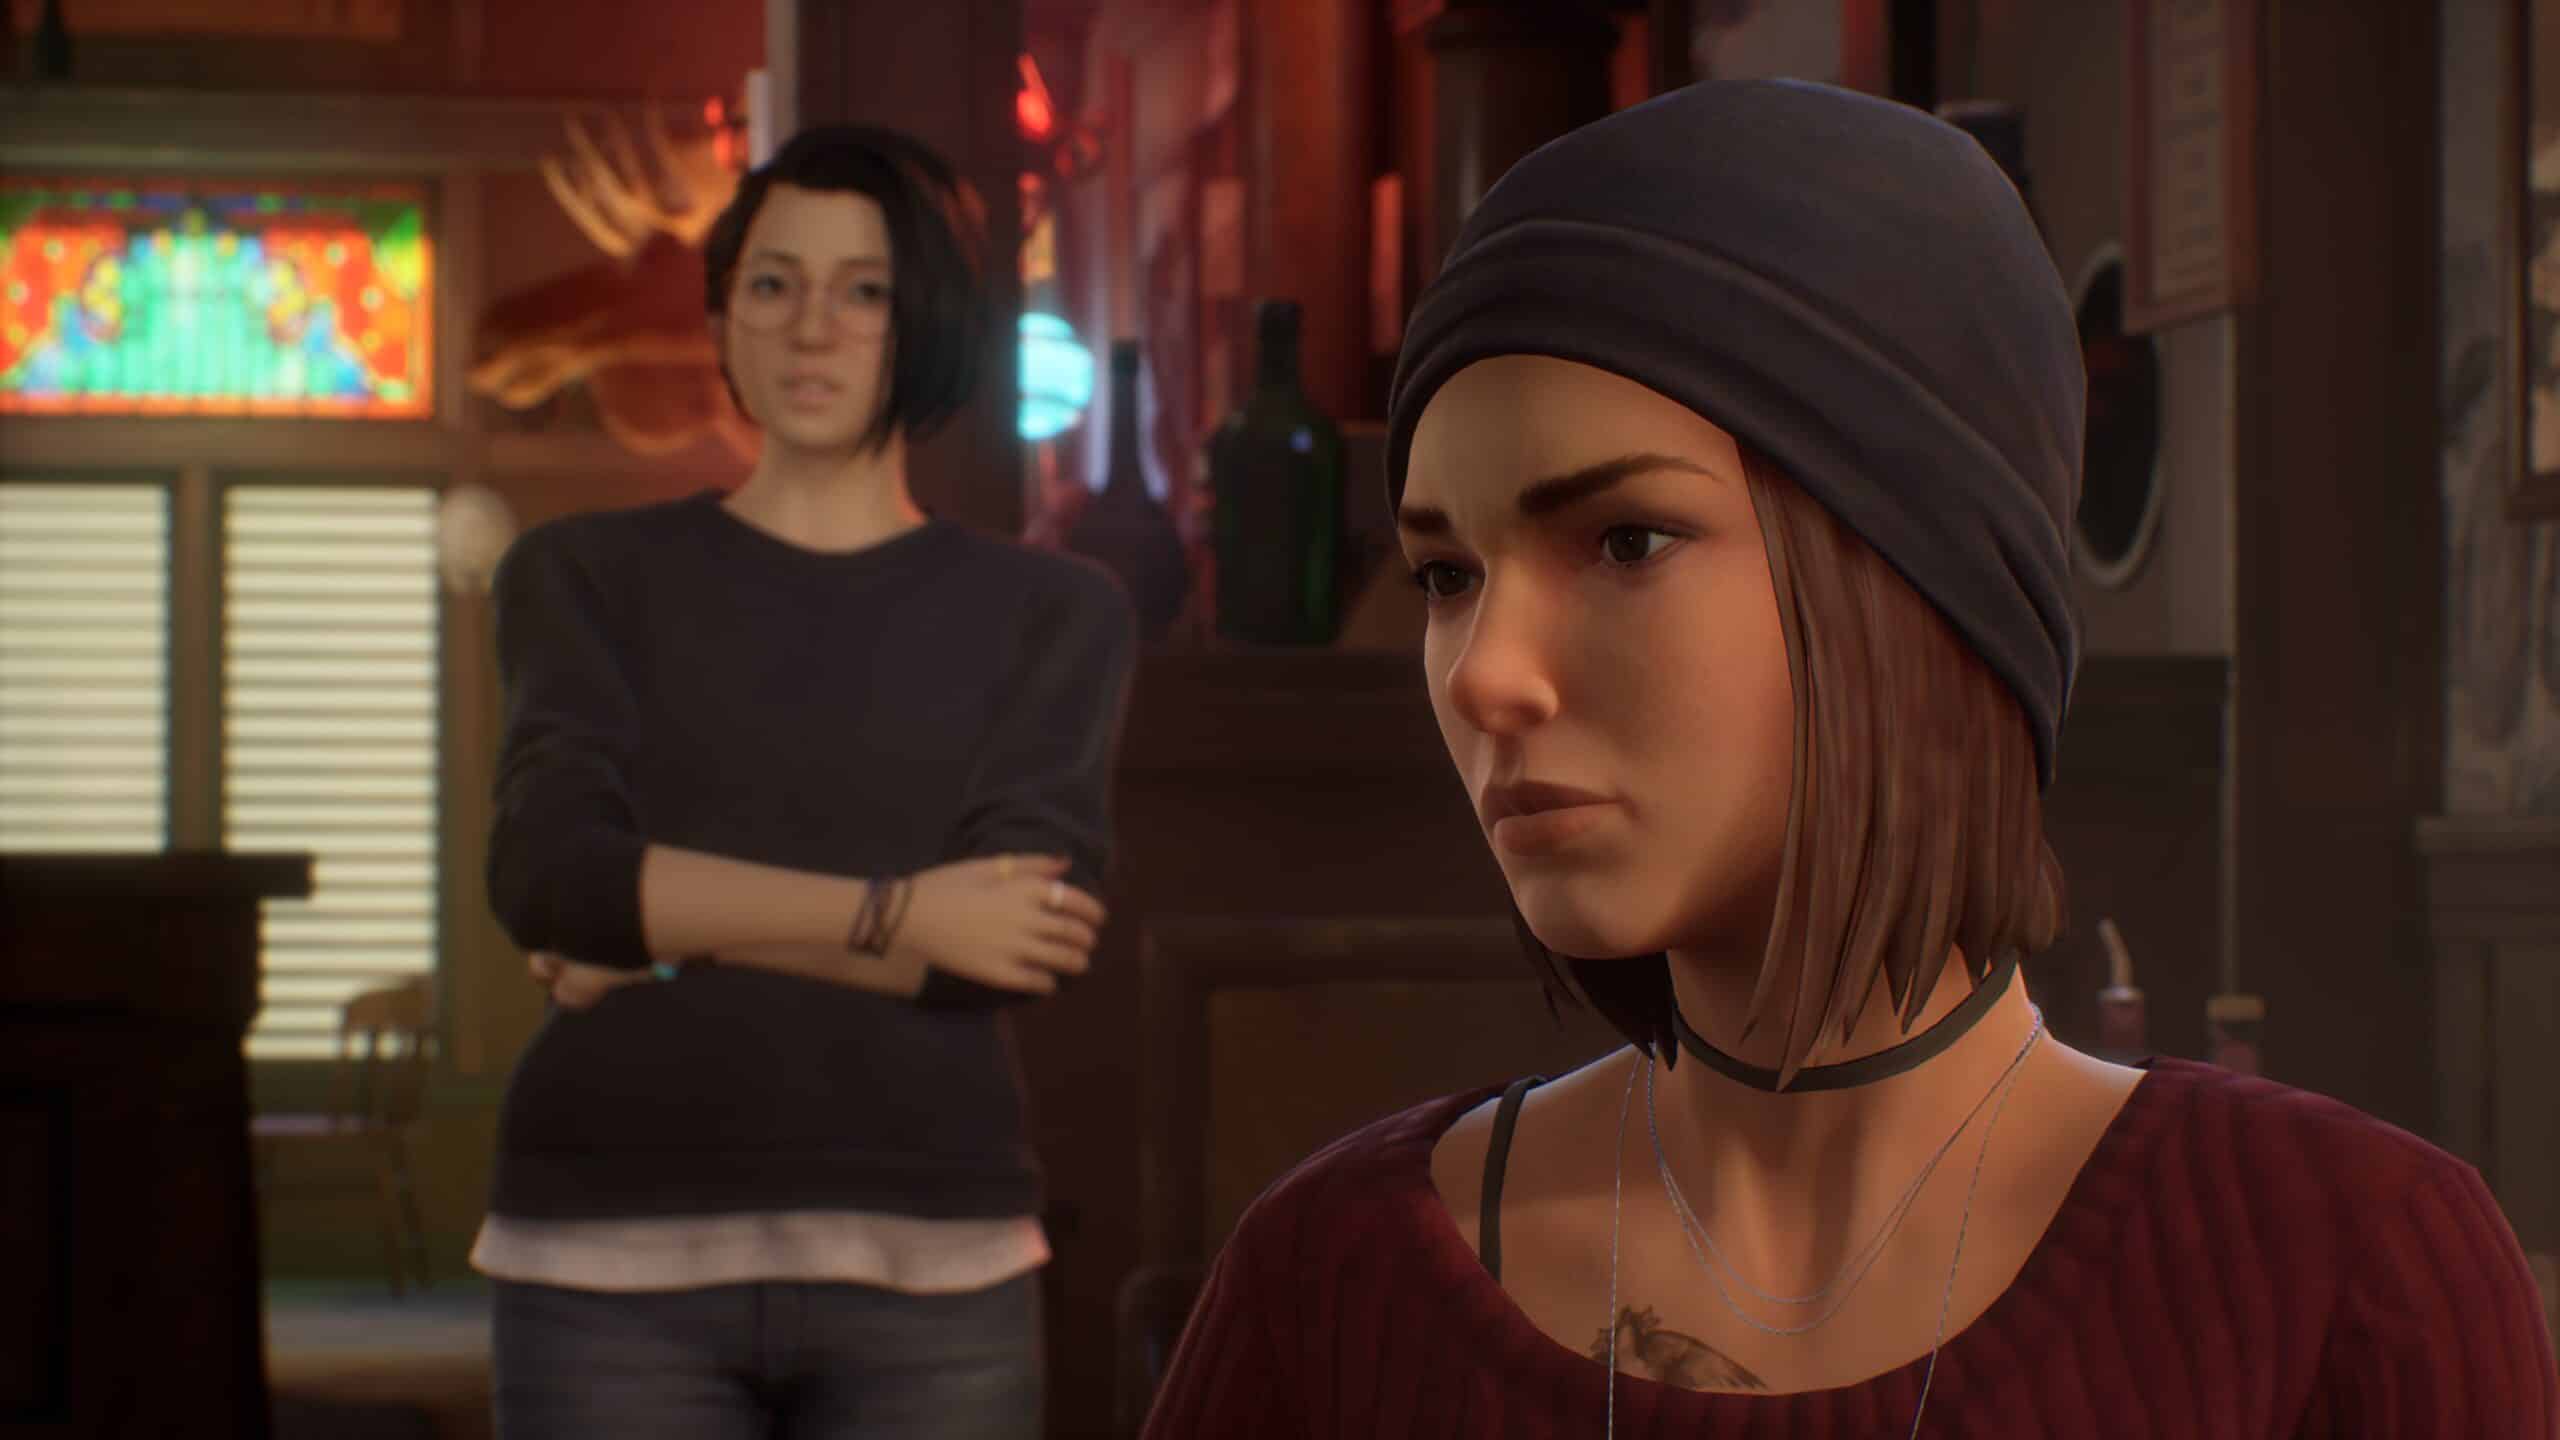 Life is Strange Remastered Collection enhances the first two games